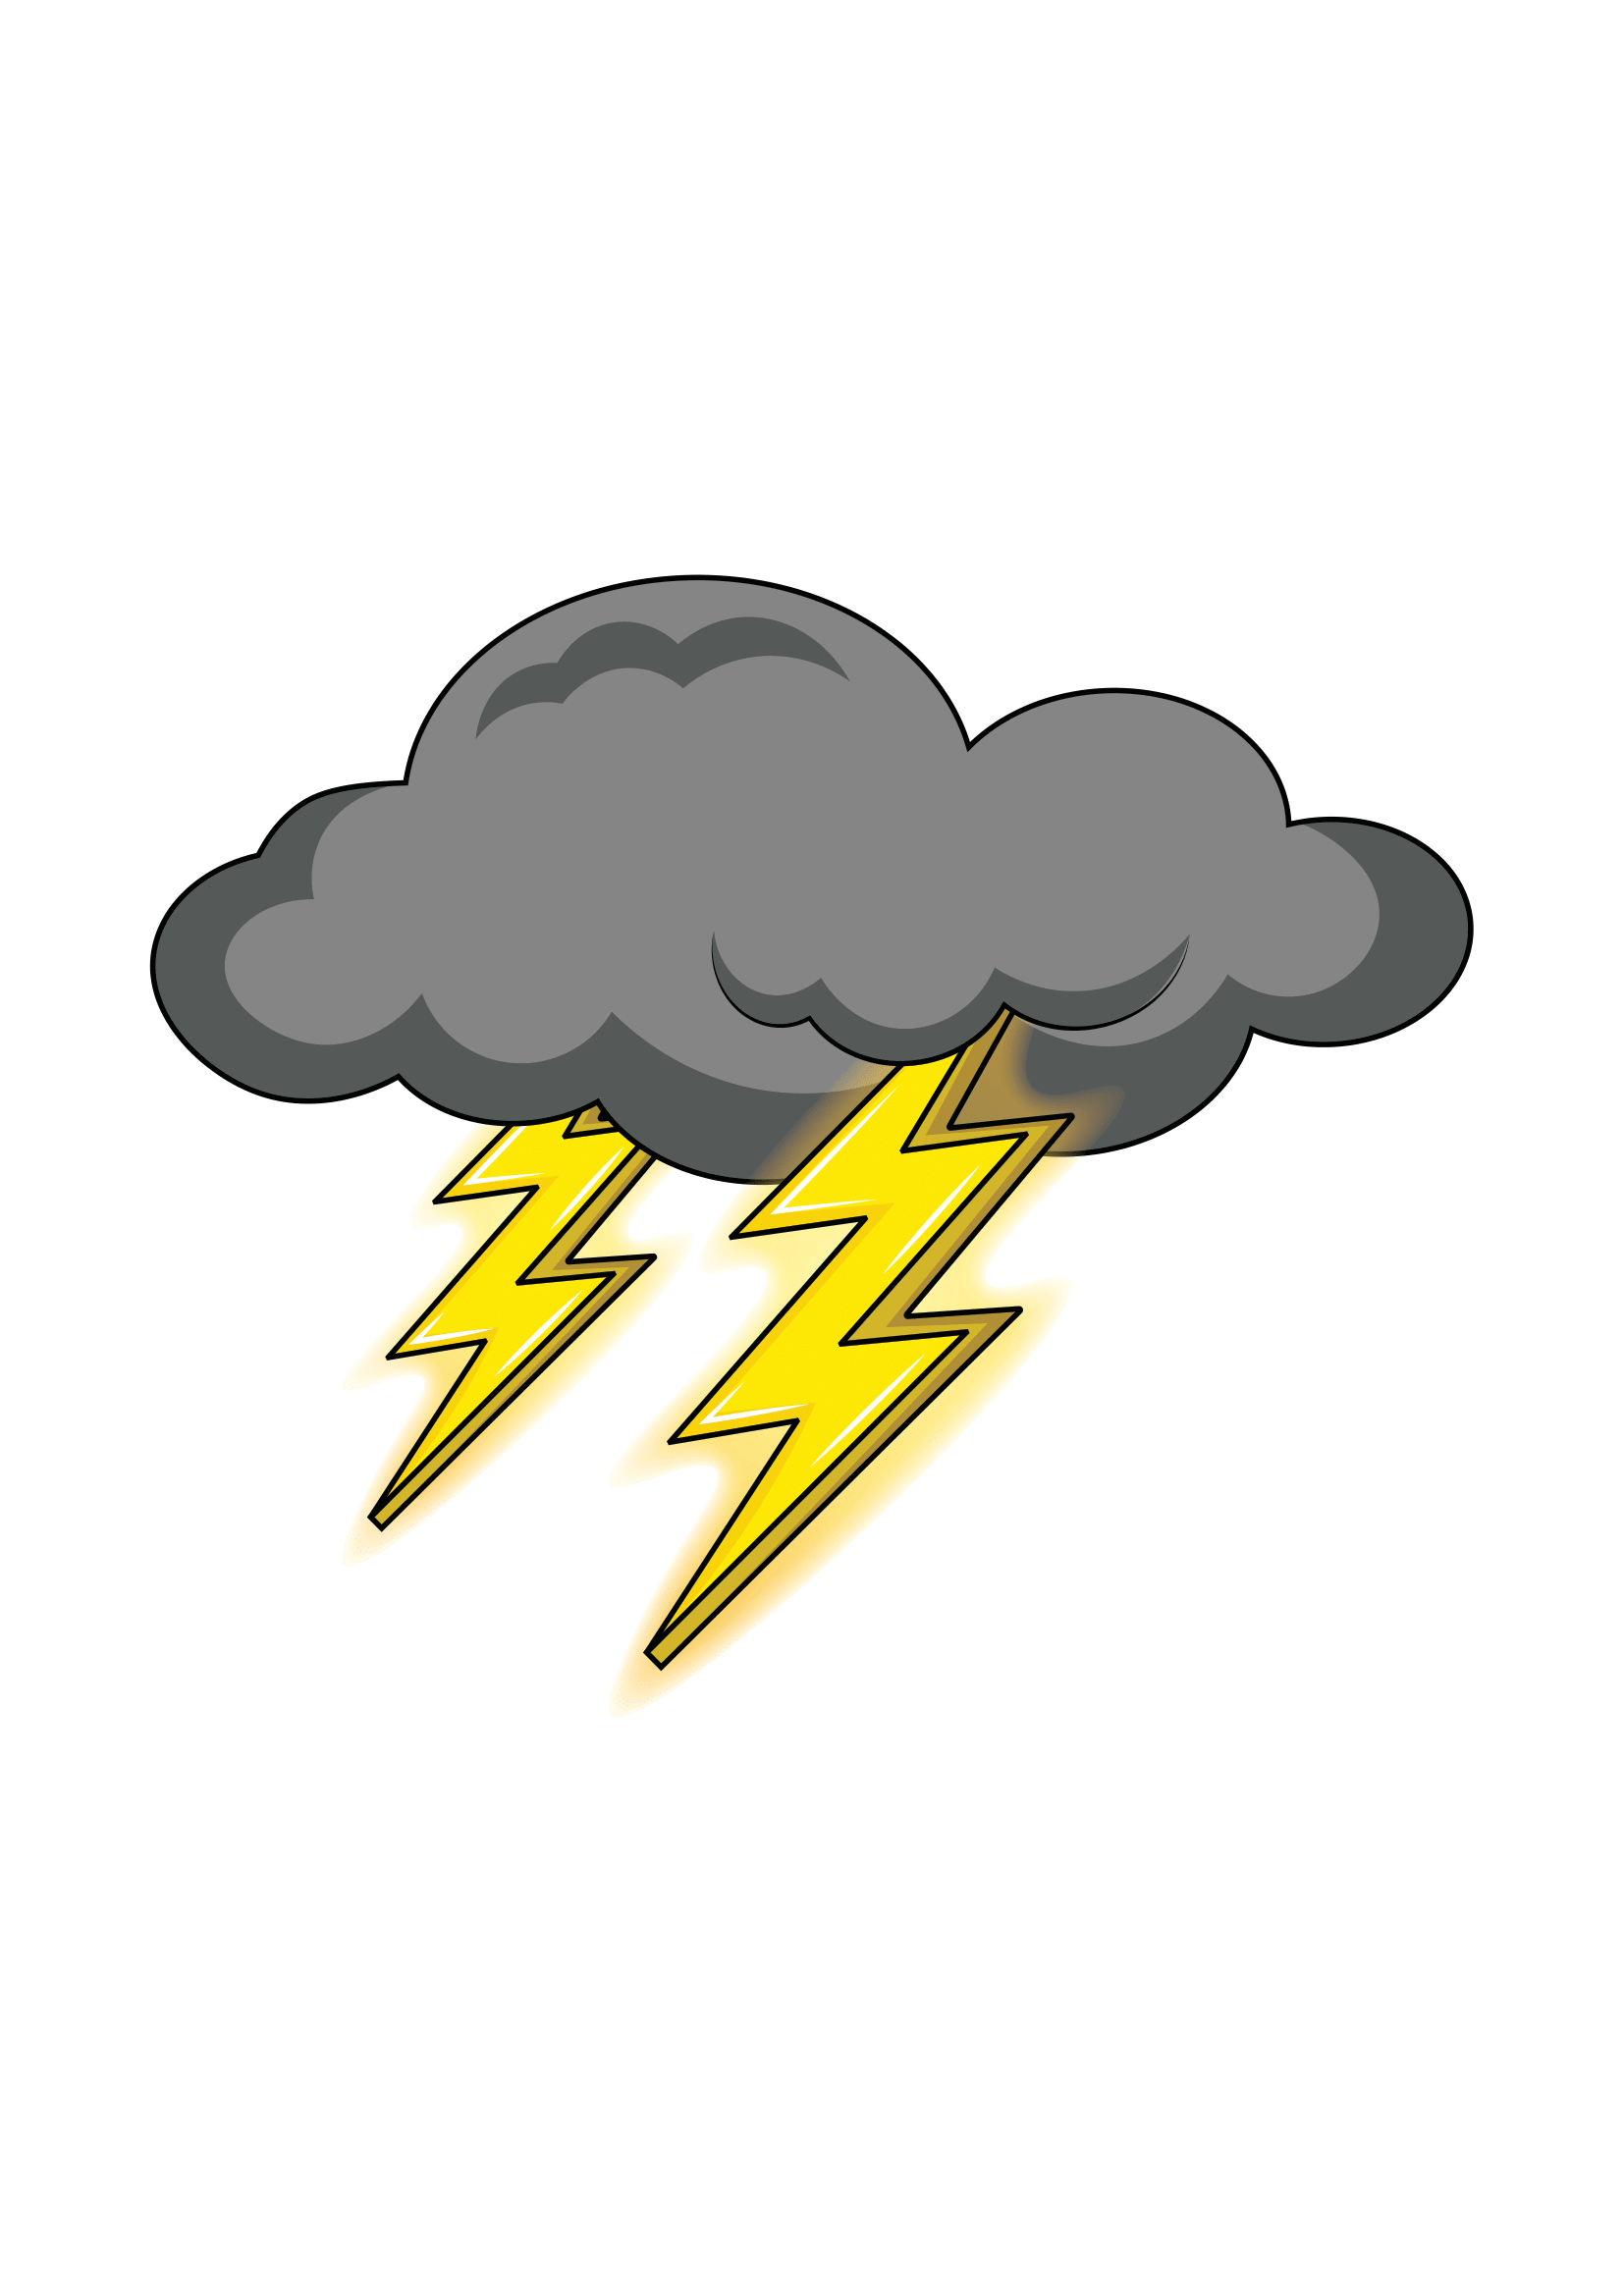 How to Draw Lightning Step by Step Printable